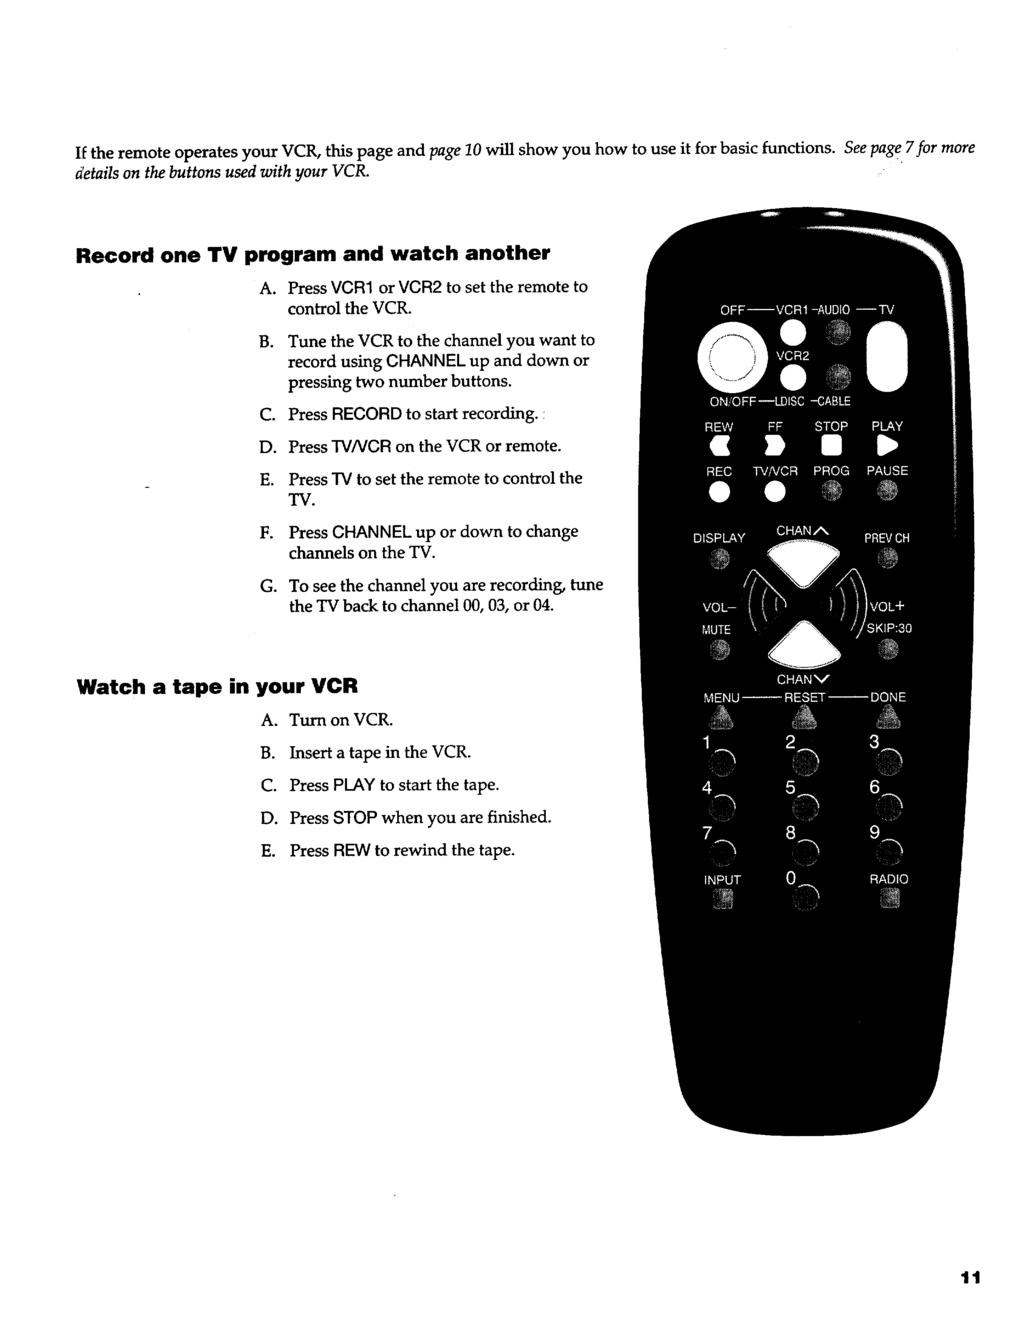 If the remote operates your VCR, this page and page 10 will show you how to use it for basic functions. See page 7for more details on the buttons used with your VCR.